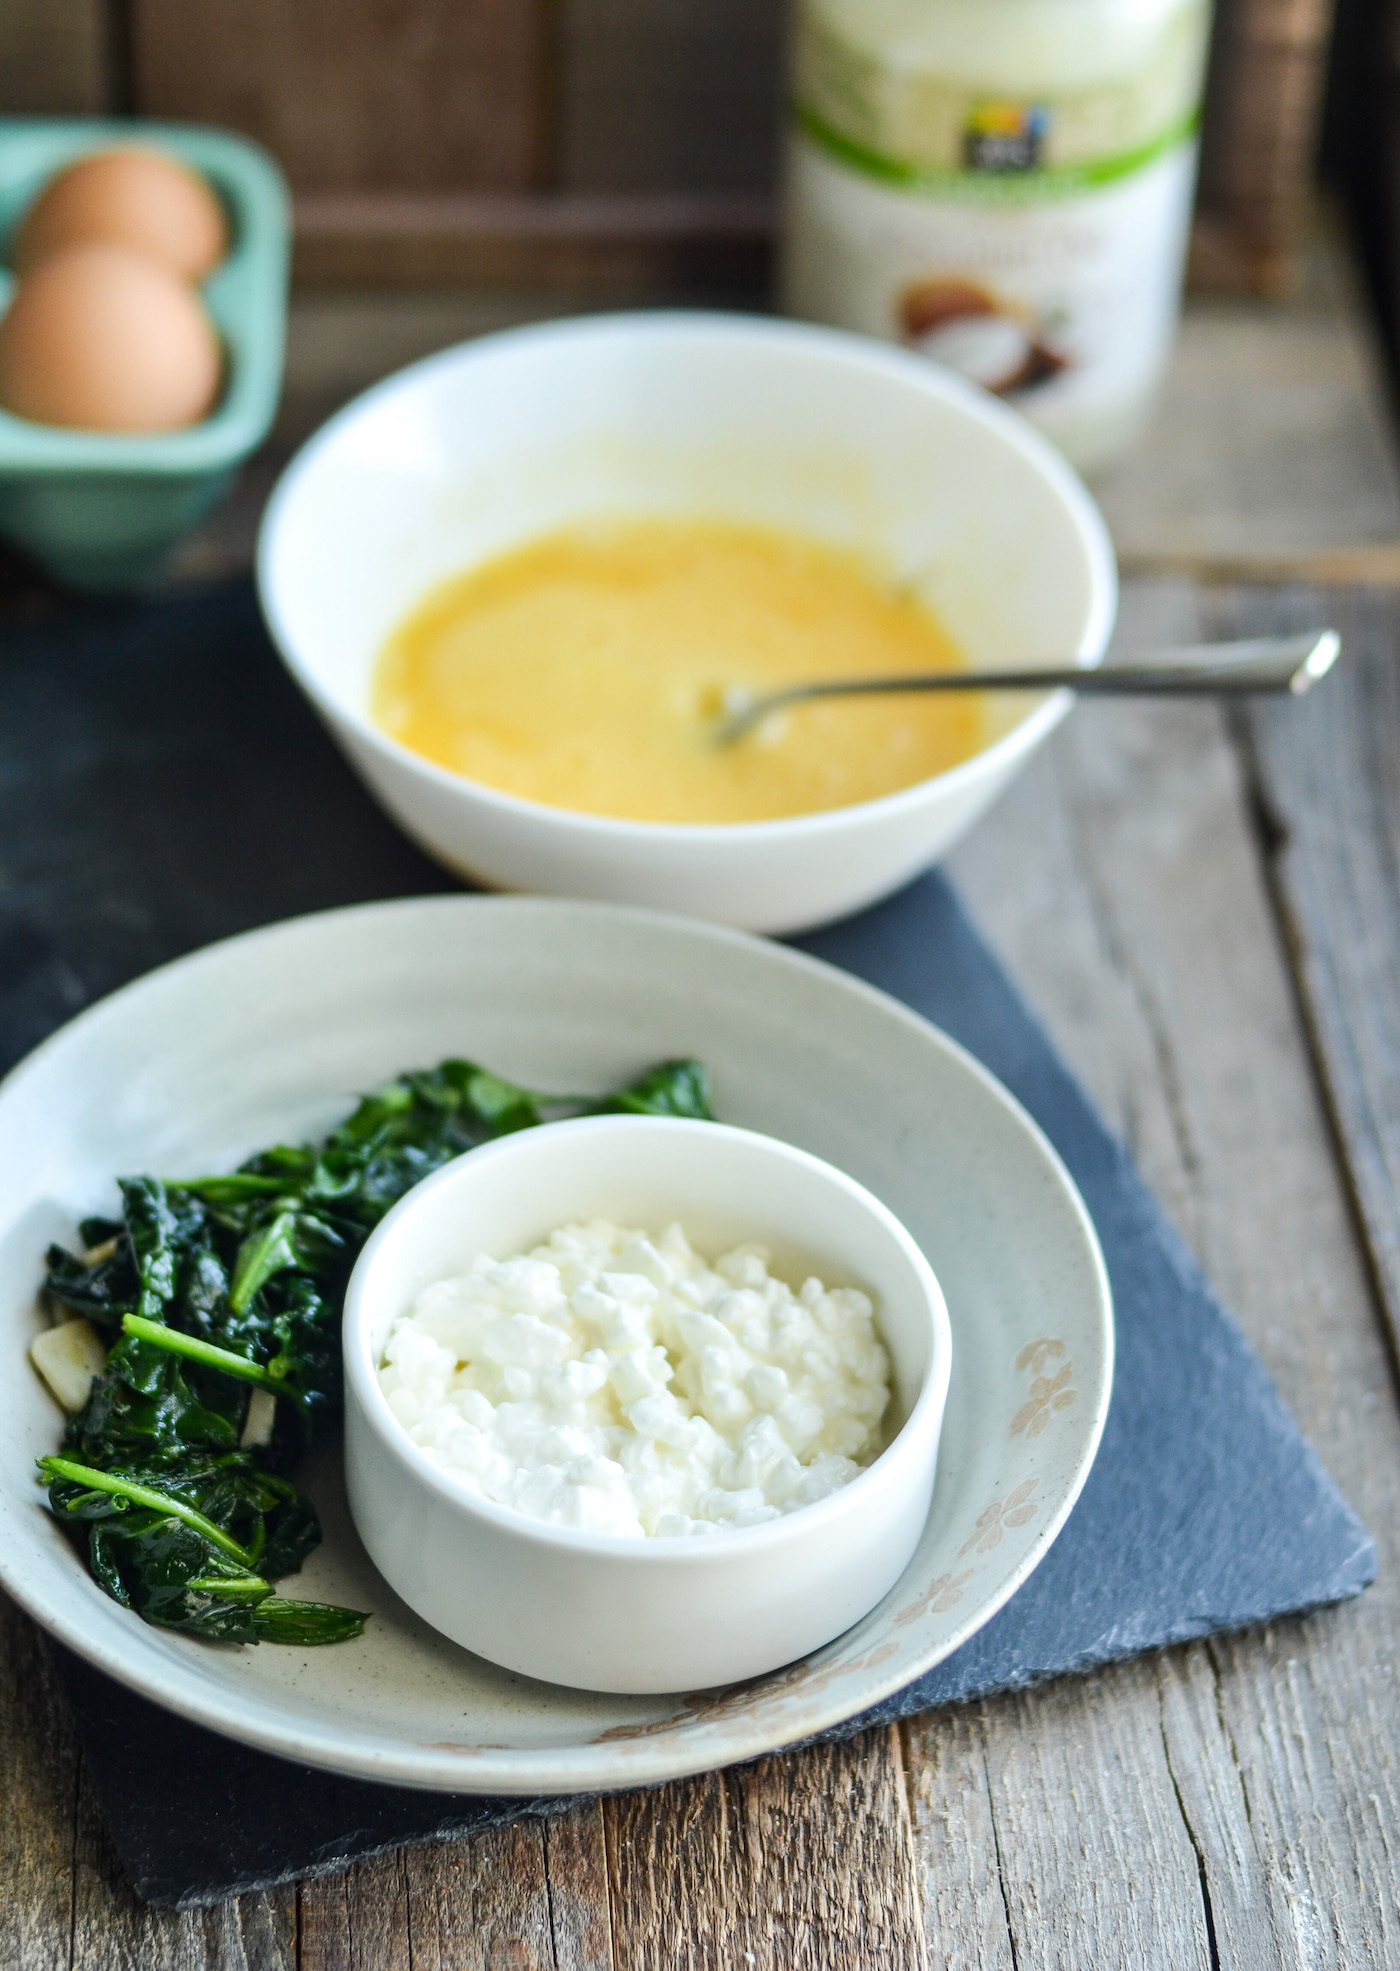 Cottage cheese, whisked eggs, and wilted spinach